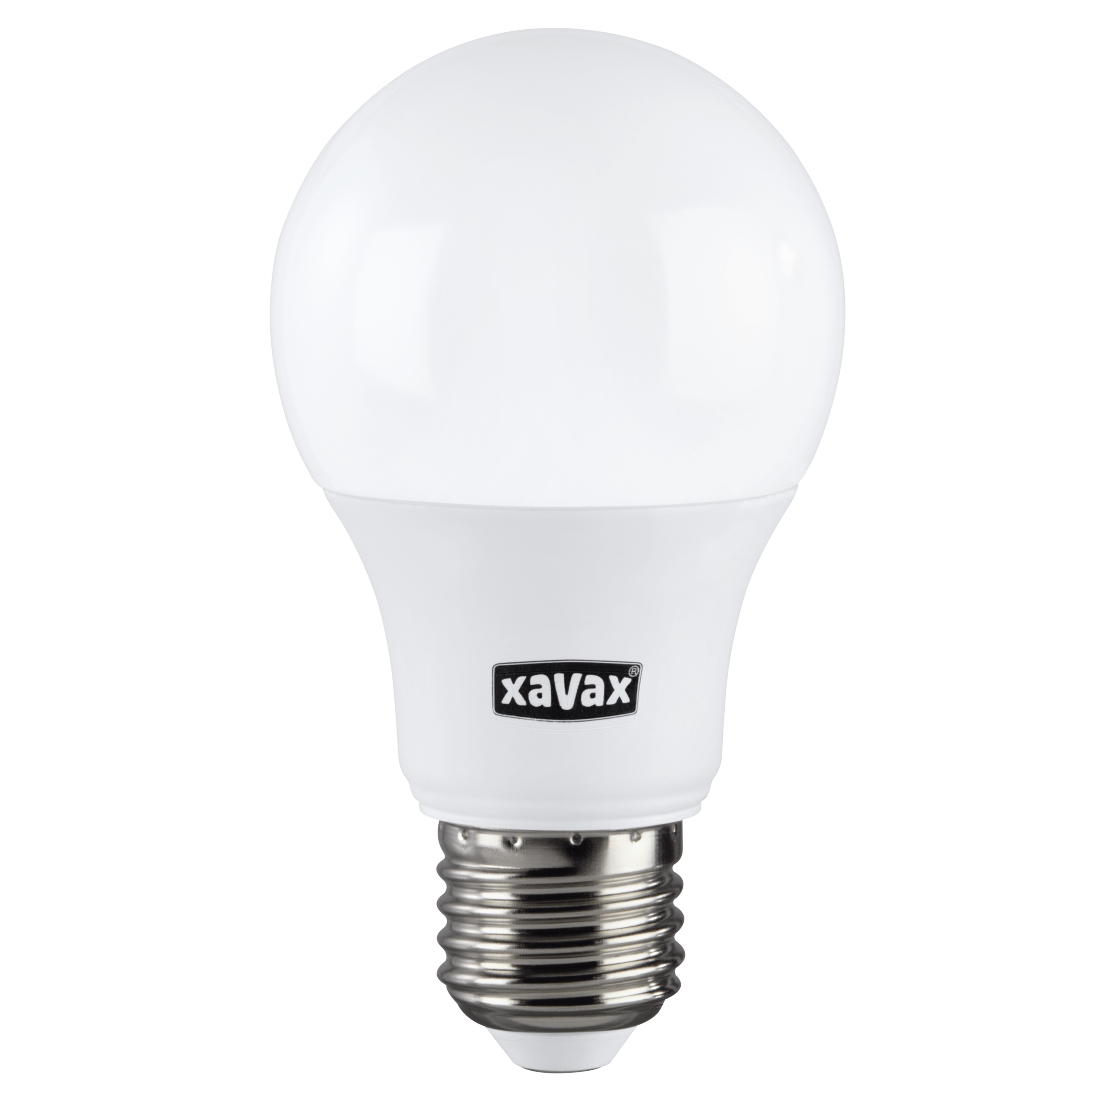 abx High-Res Image - Xavax, LED Bulb, E27, 806lm replaces 60W, incandescent bulb, warm, dimmable